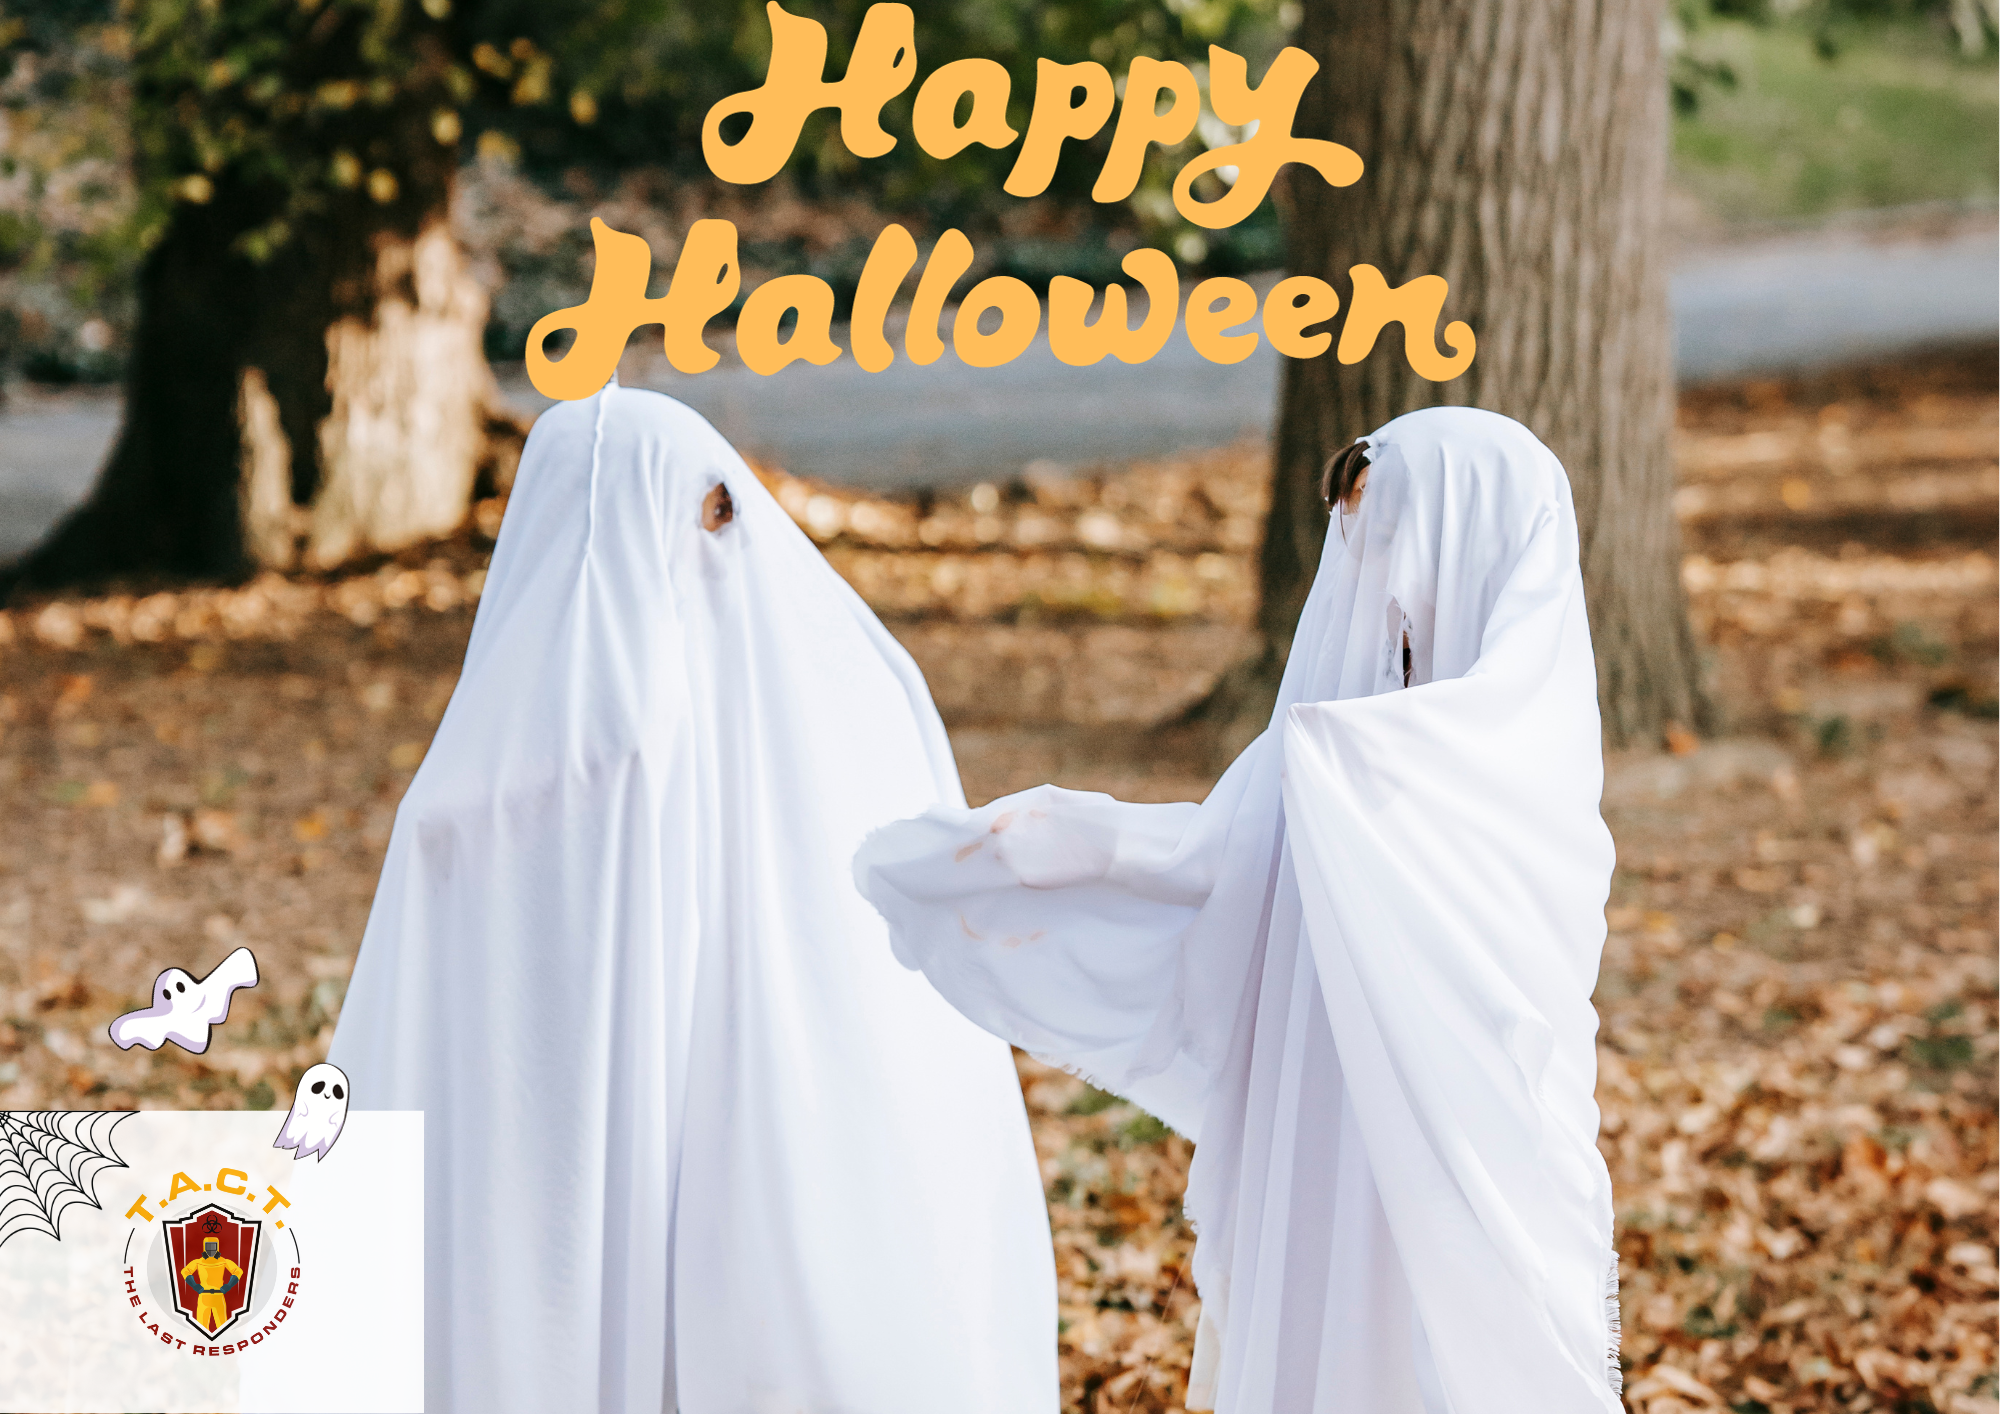 10 Essential Halloween Safety Tips to Keep Your Loved Ones Safe